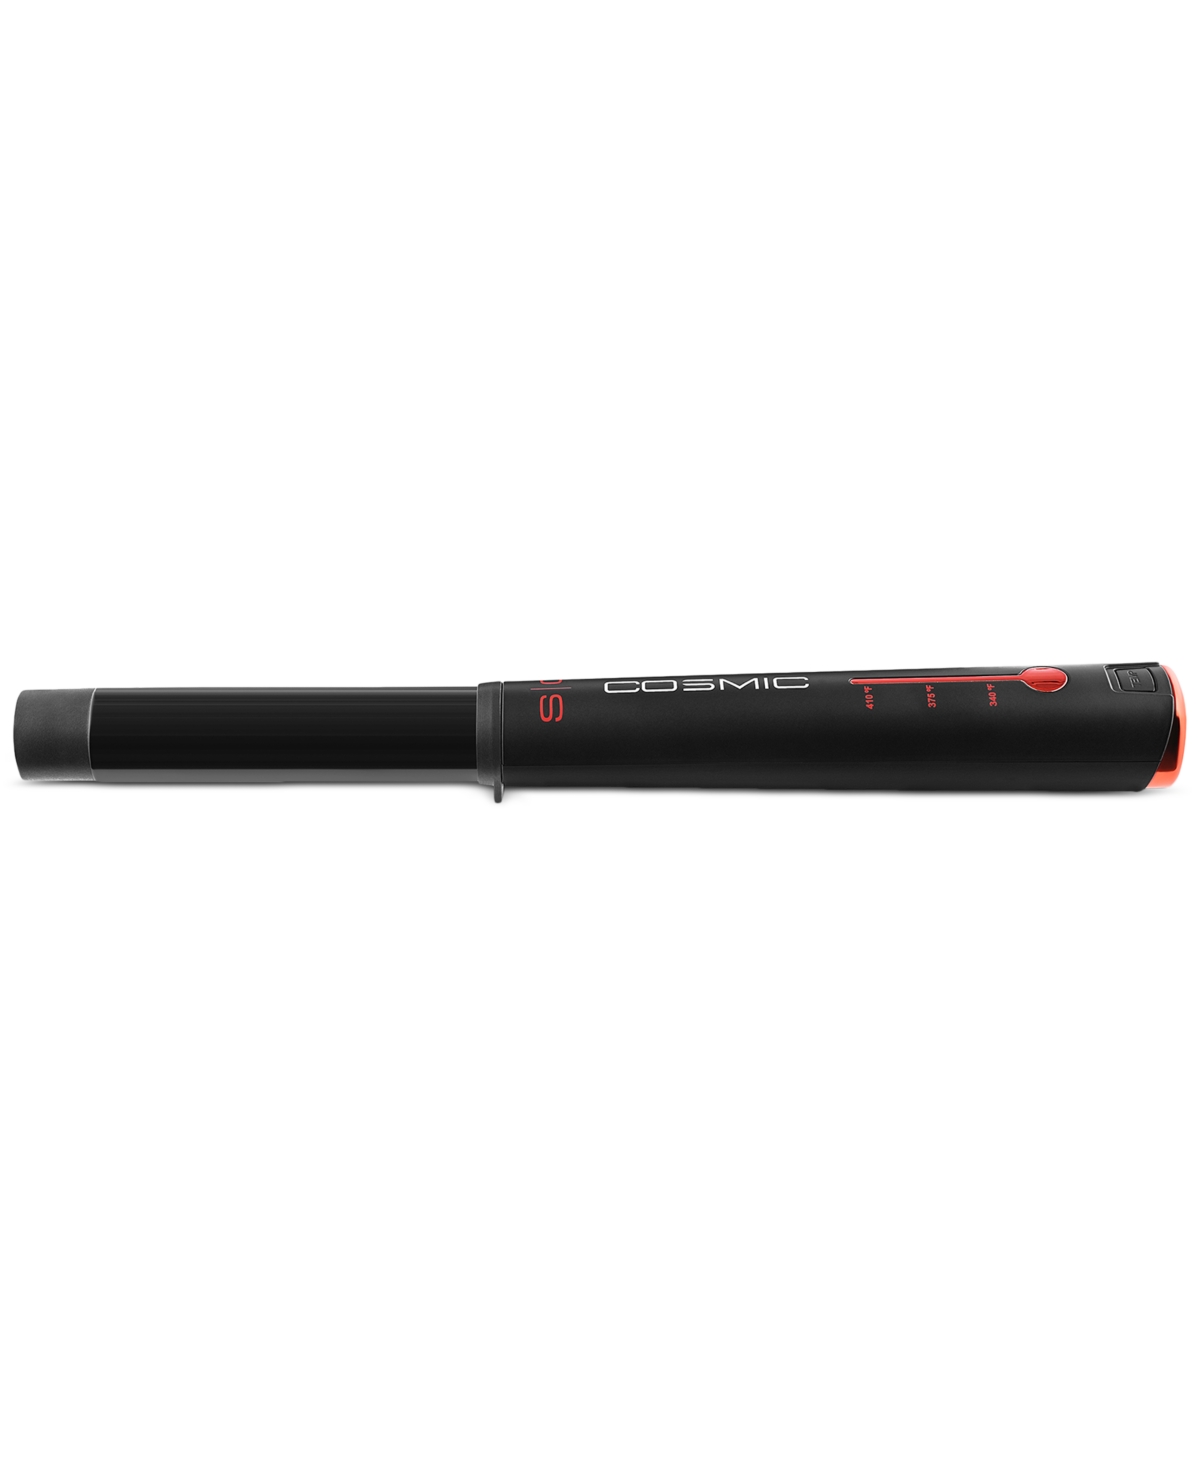 Shop Stylecraft 1" Cosmic Cordless Curling Wand In No Color